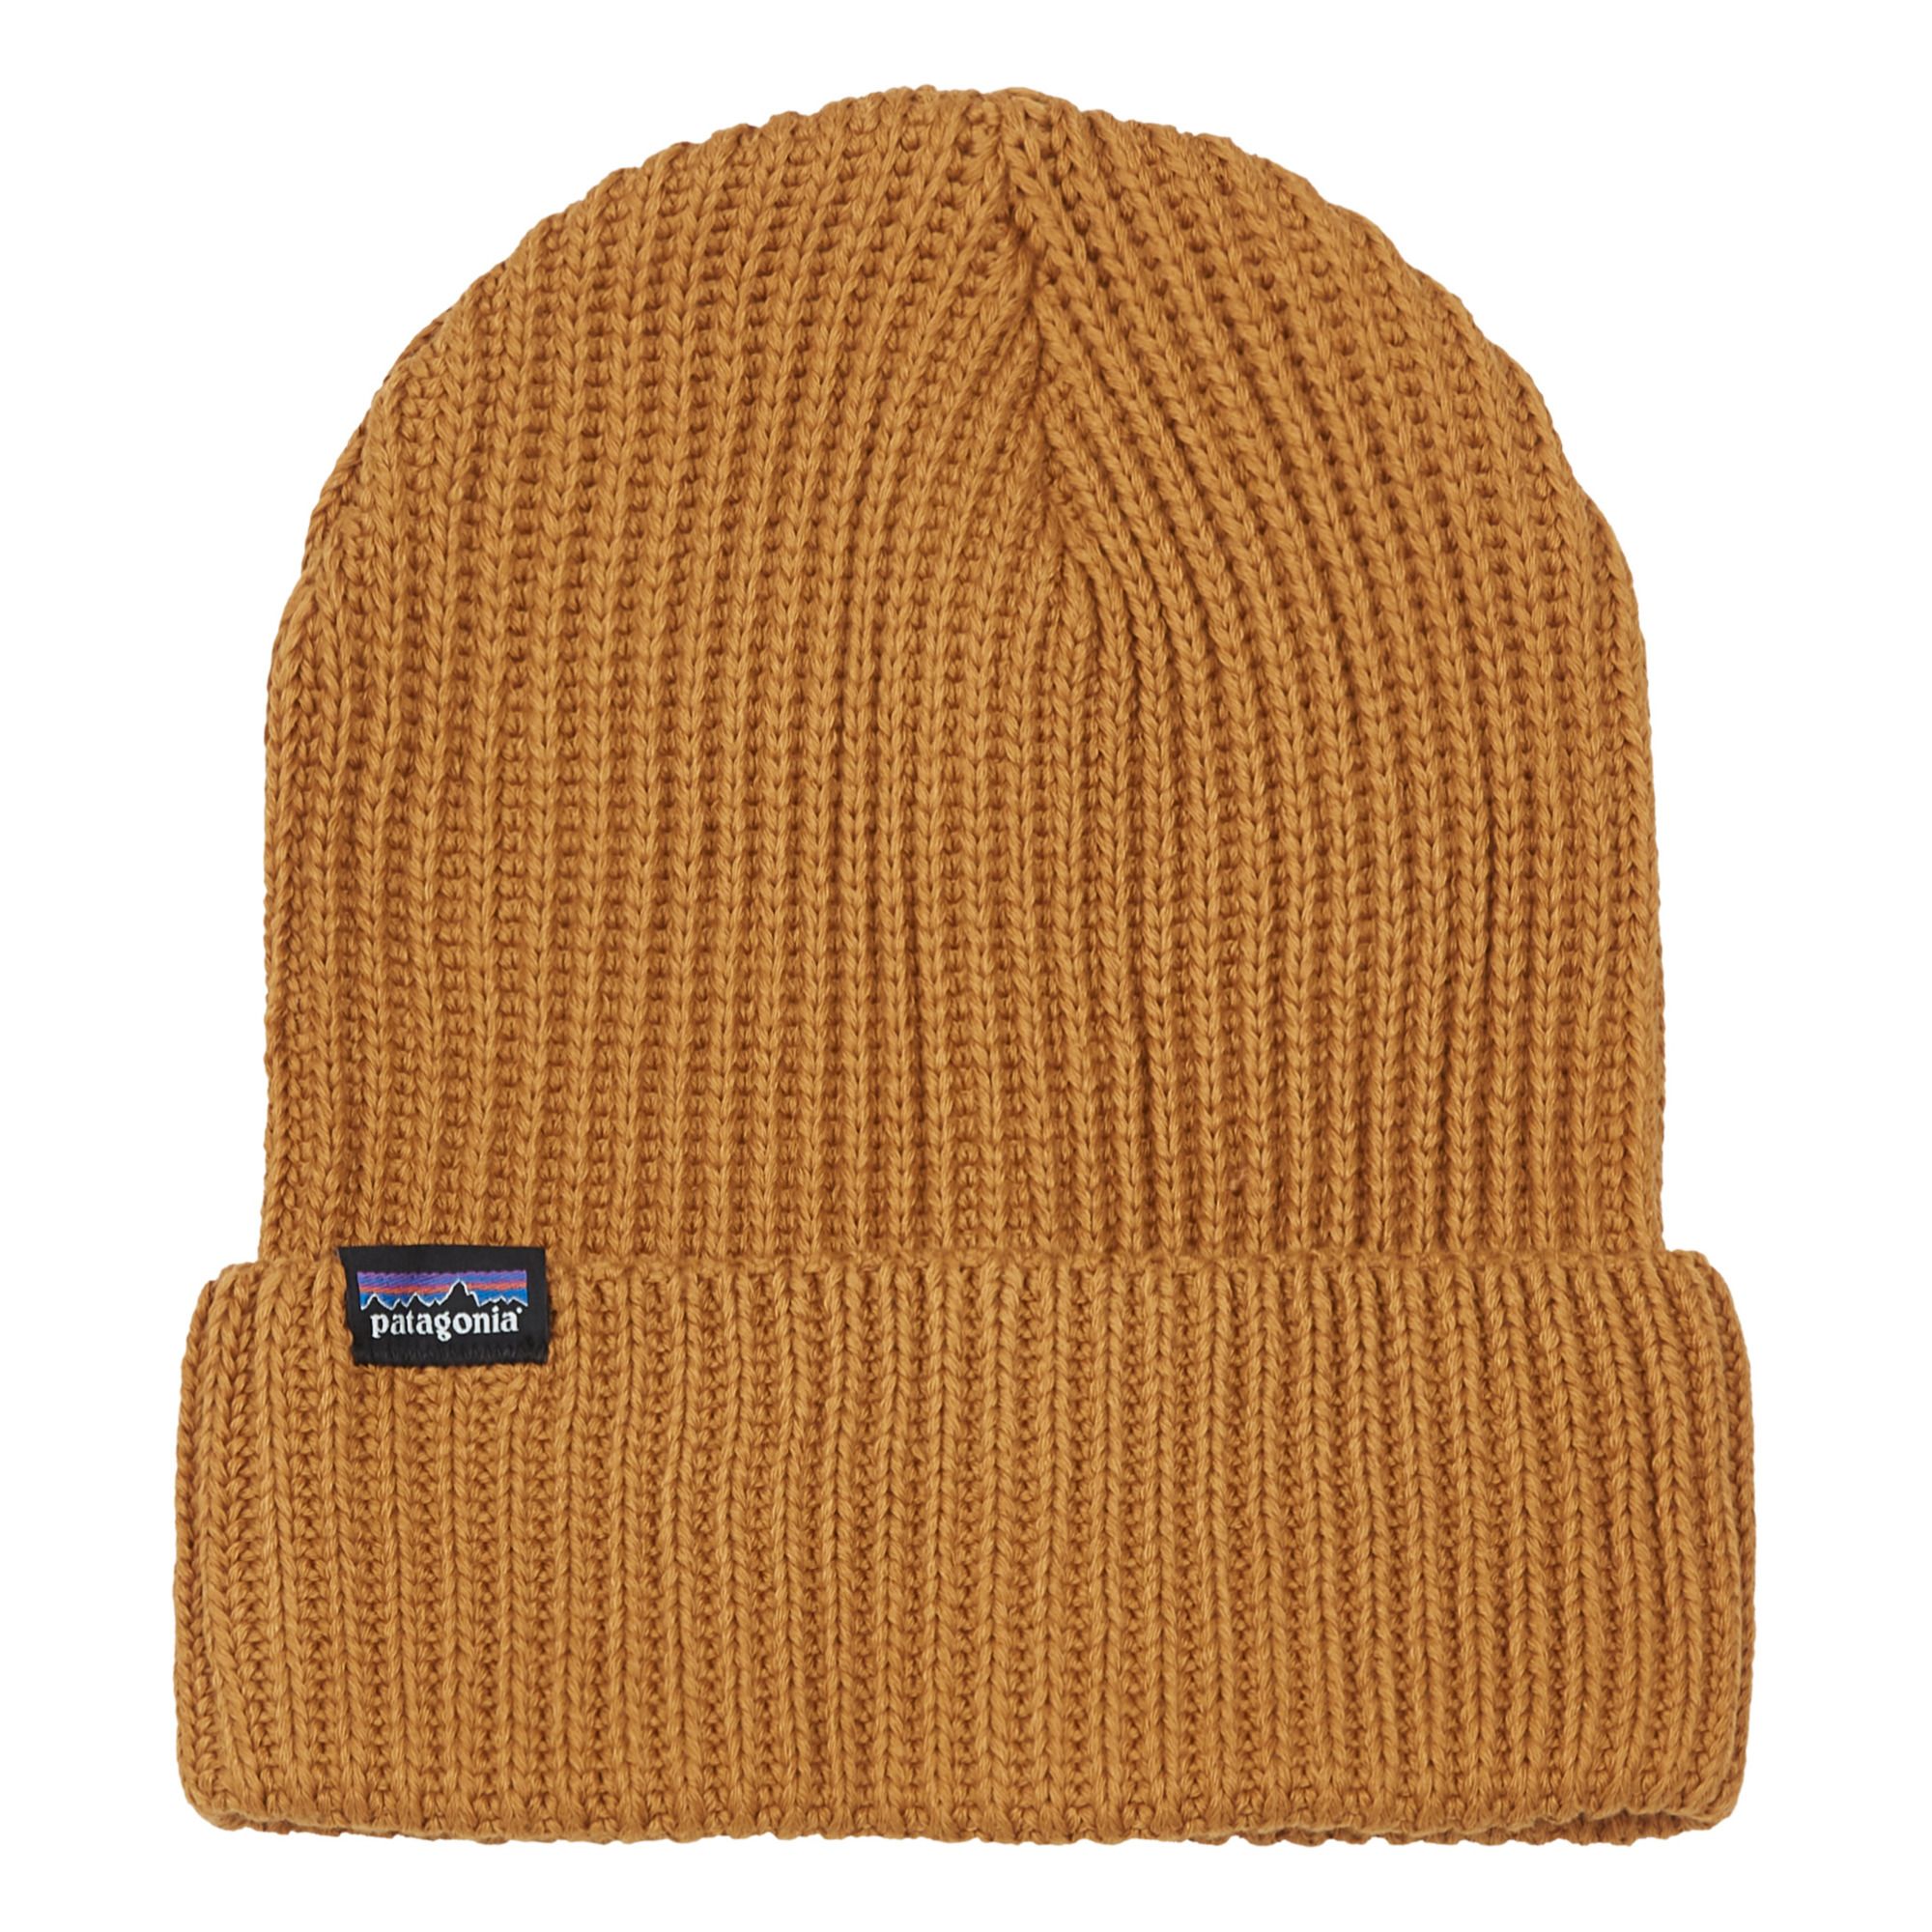 Patagonia - Bonnet Maille - Collection Homme- - Femme - Camel